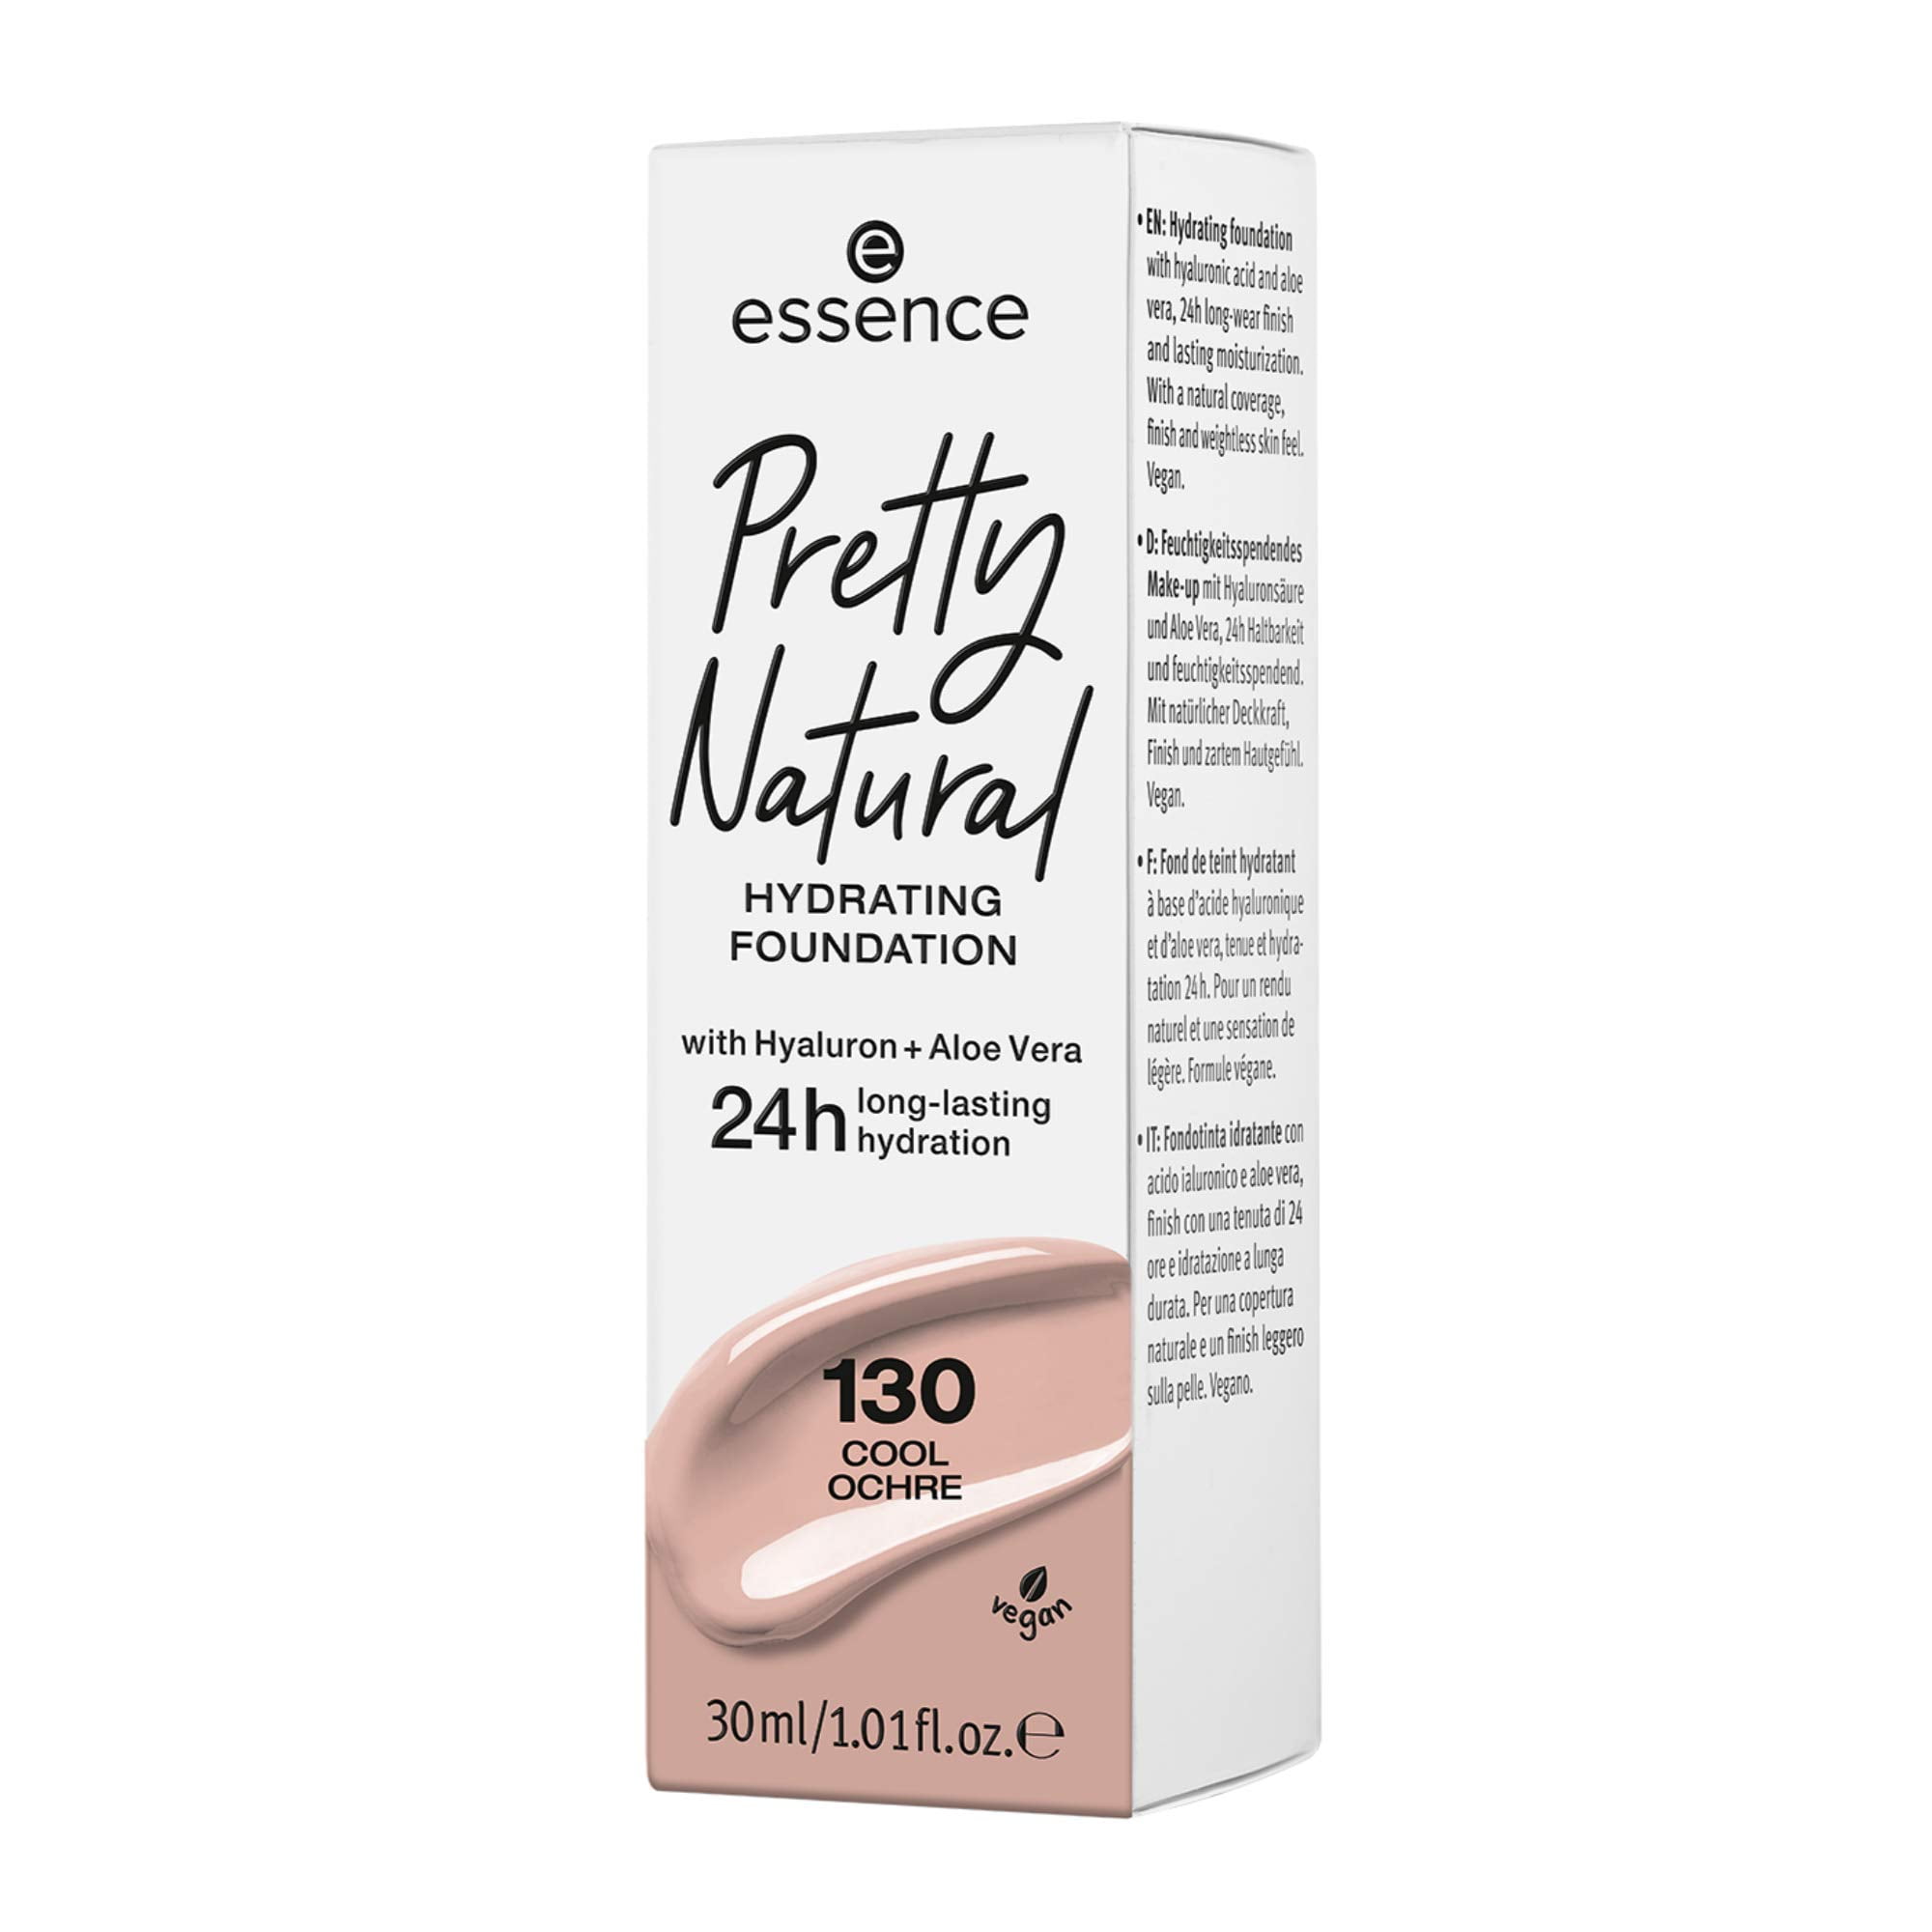 essence Pretty Natural Hydrating Foundation Medium | Buildable Coverage for  a Natural Skin Look Formulated w/ Hyaluronic Acid & Aloe Vera Made w/o  Gluten, Parabens, Oil & Alcohol Vegan & Cruelty Free - | Foundation